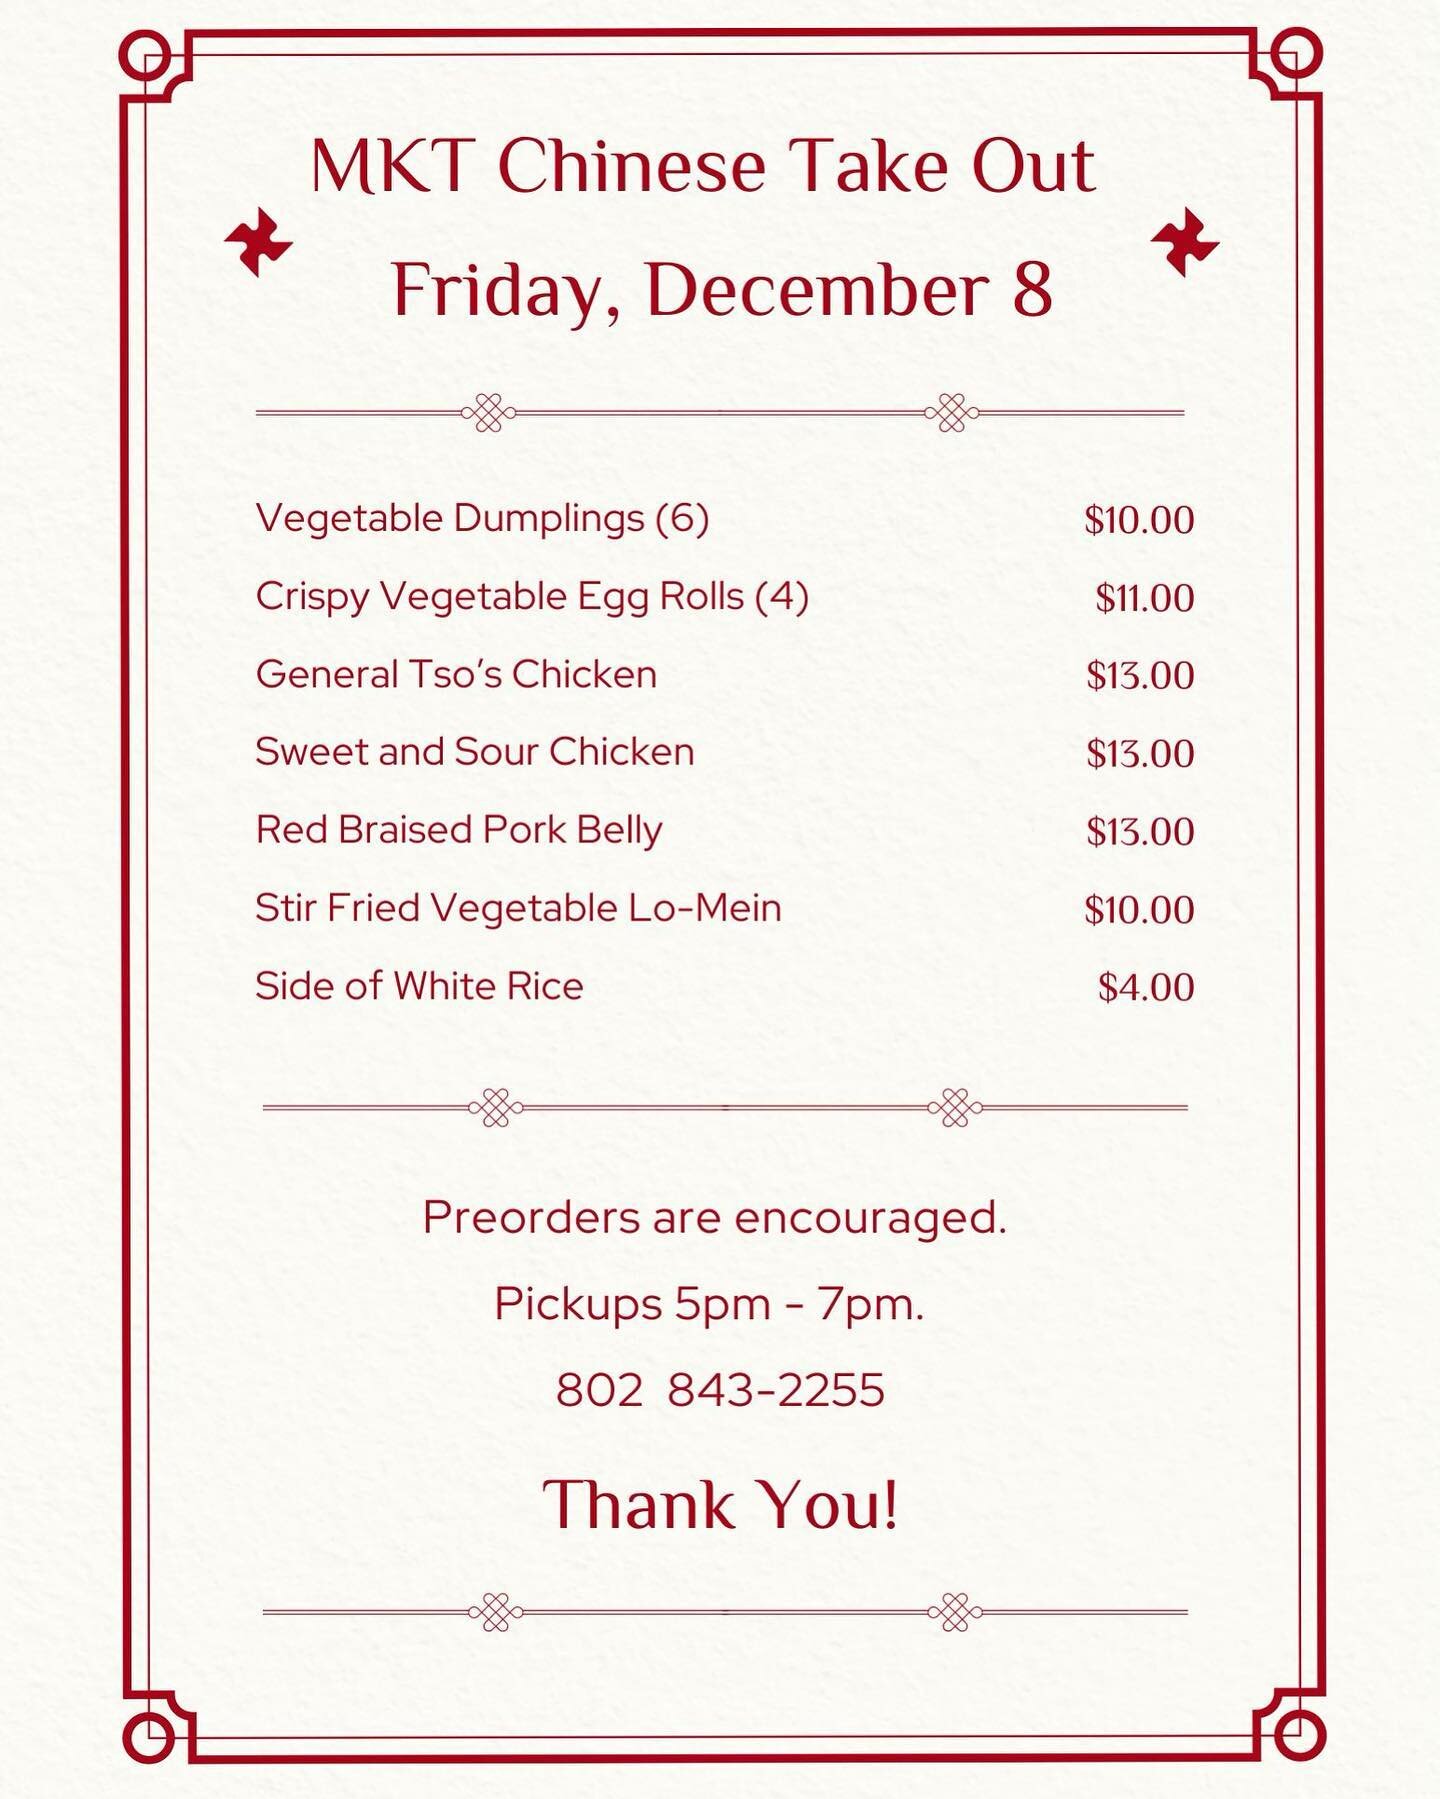 We&rsquo;re doing a Chinese takeout! 
Call 843-2255 to place your order!